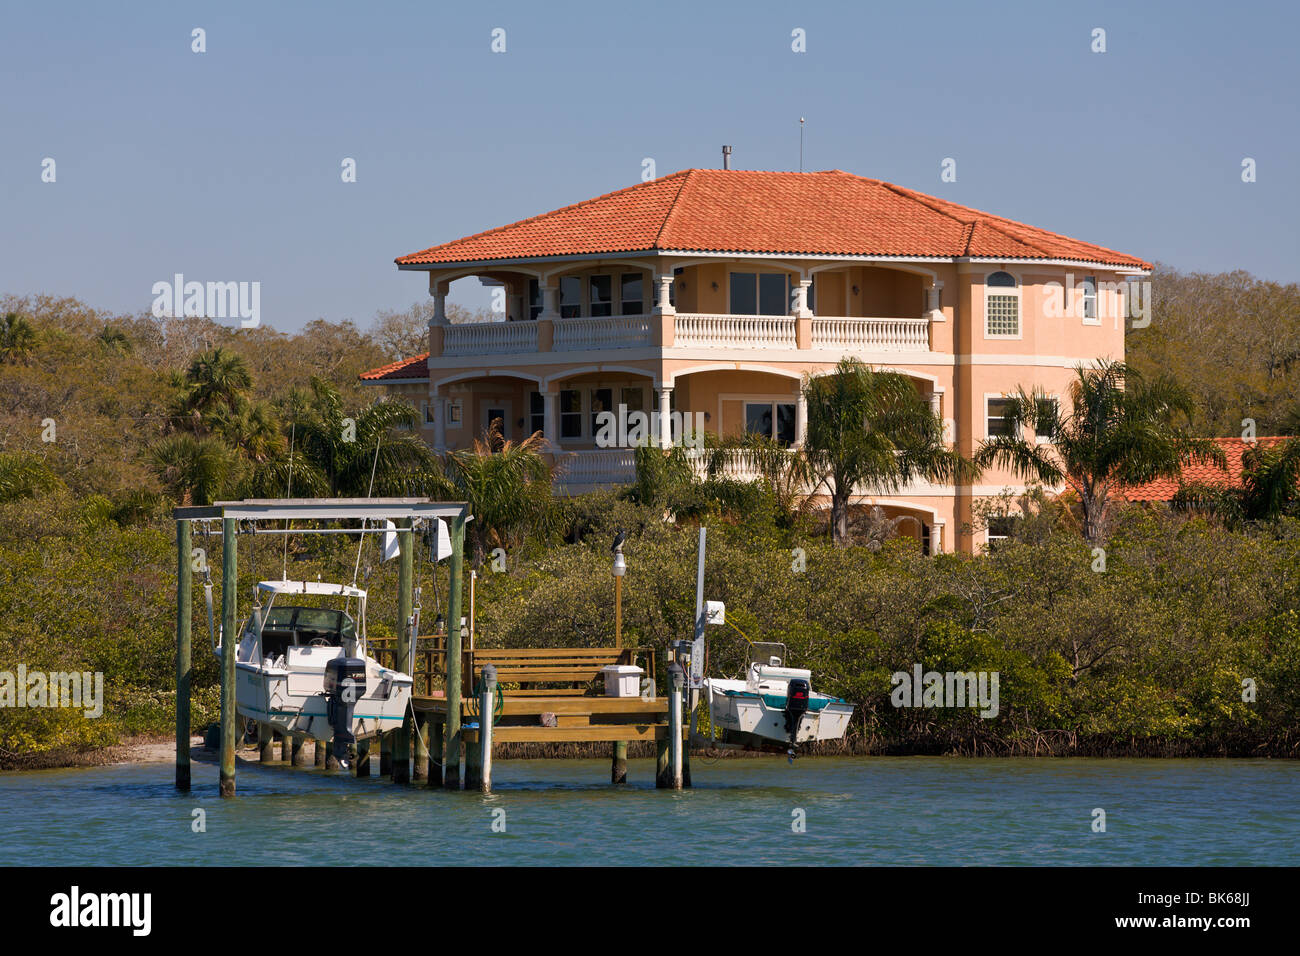 Luxury waterside house and boats, St Petersburg, Florida, USA Stock Photo